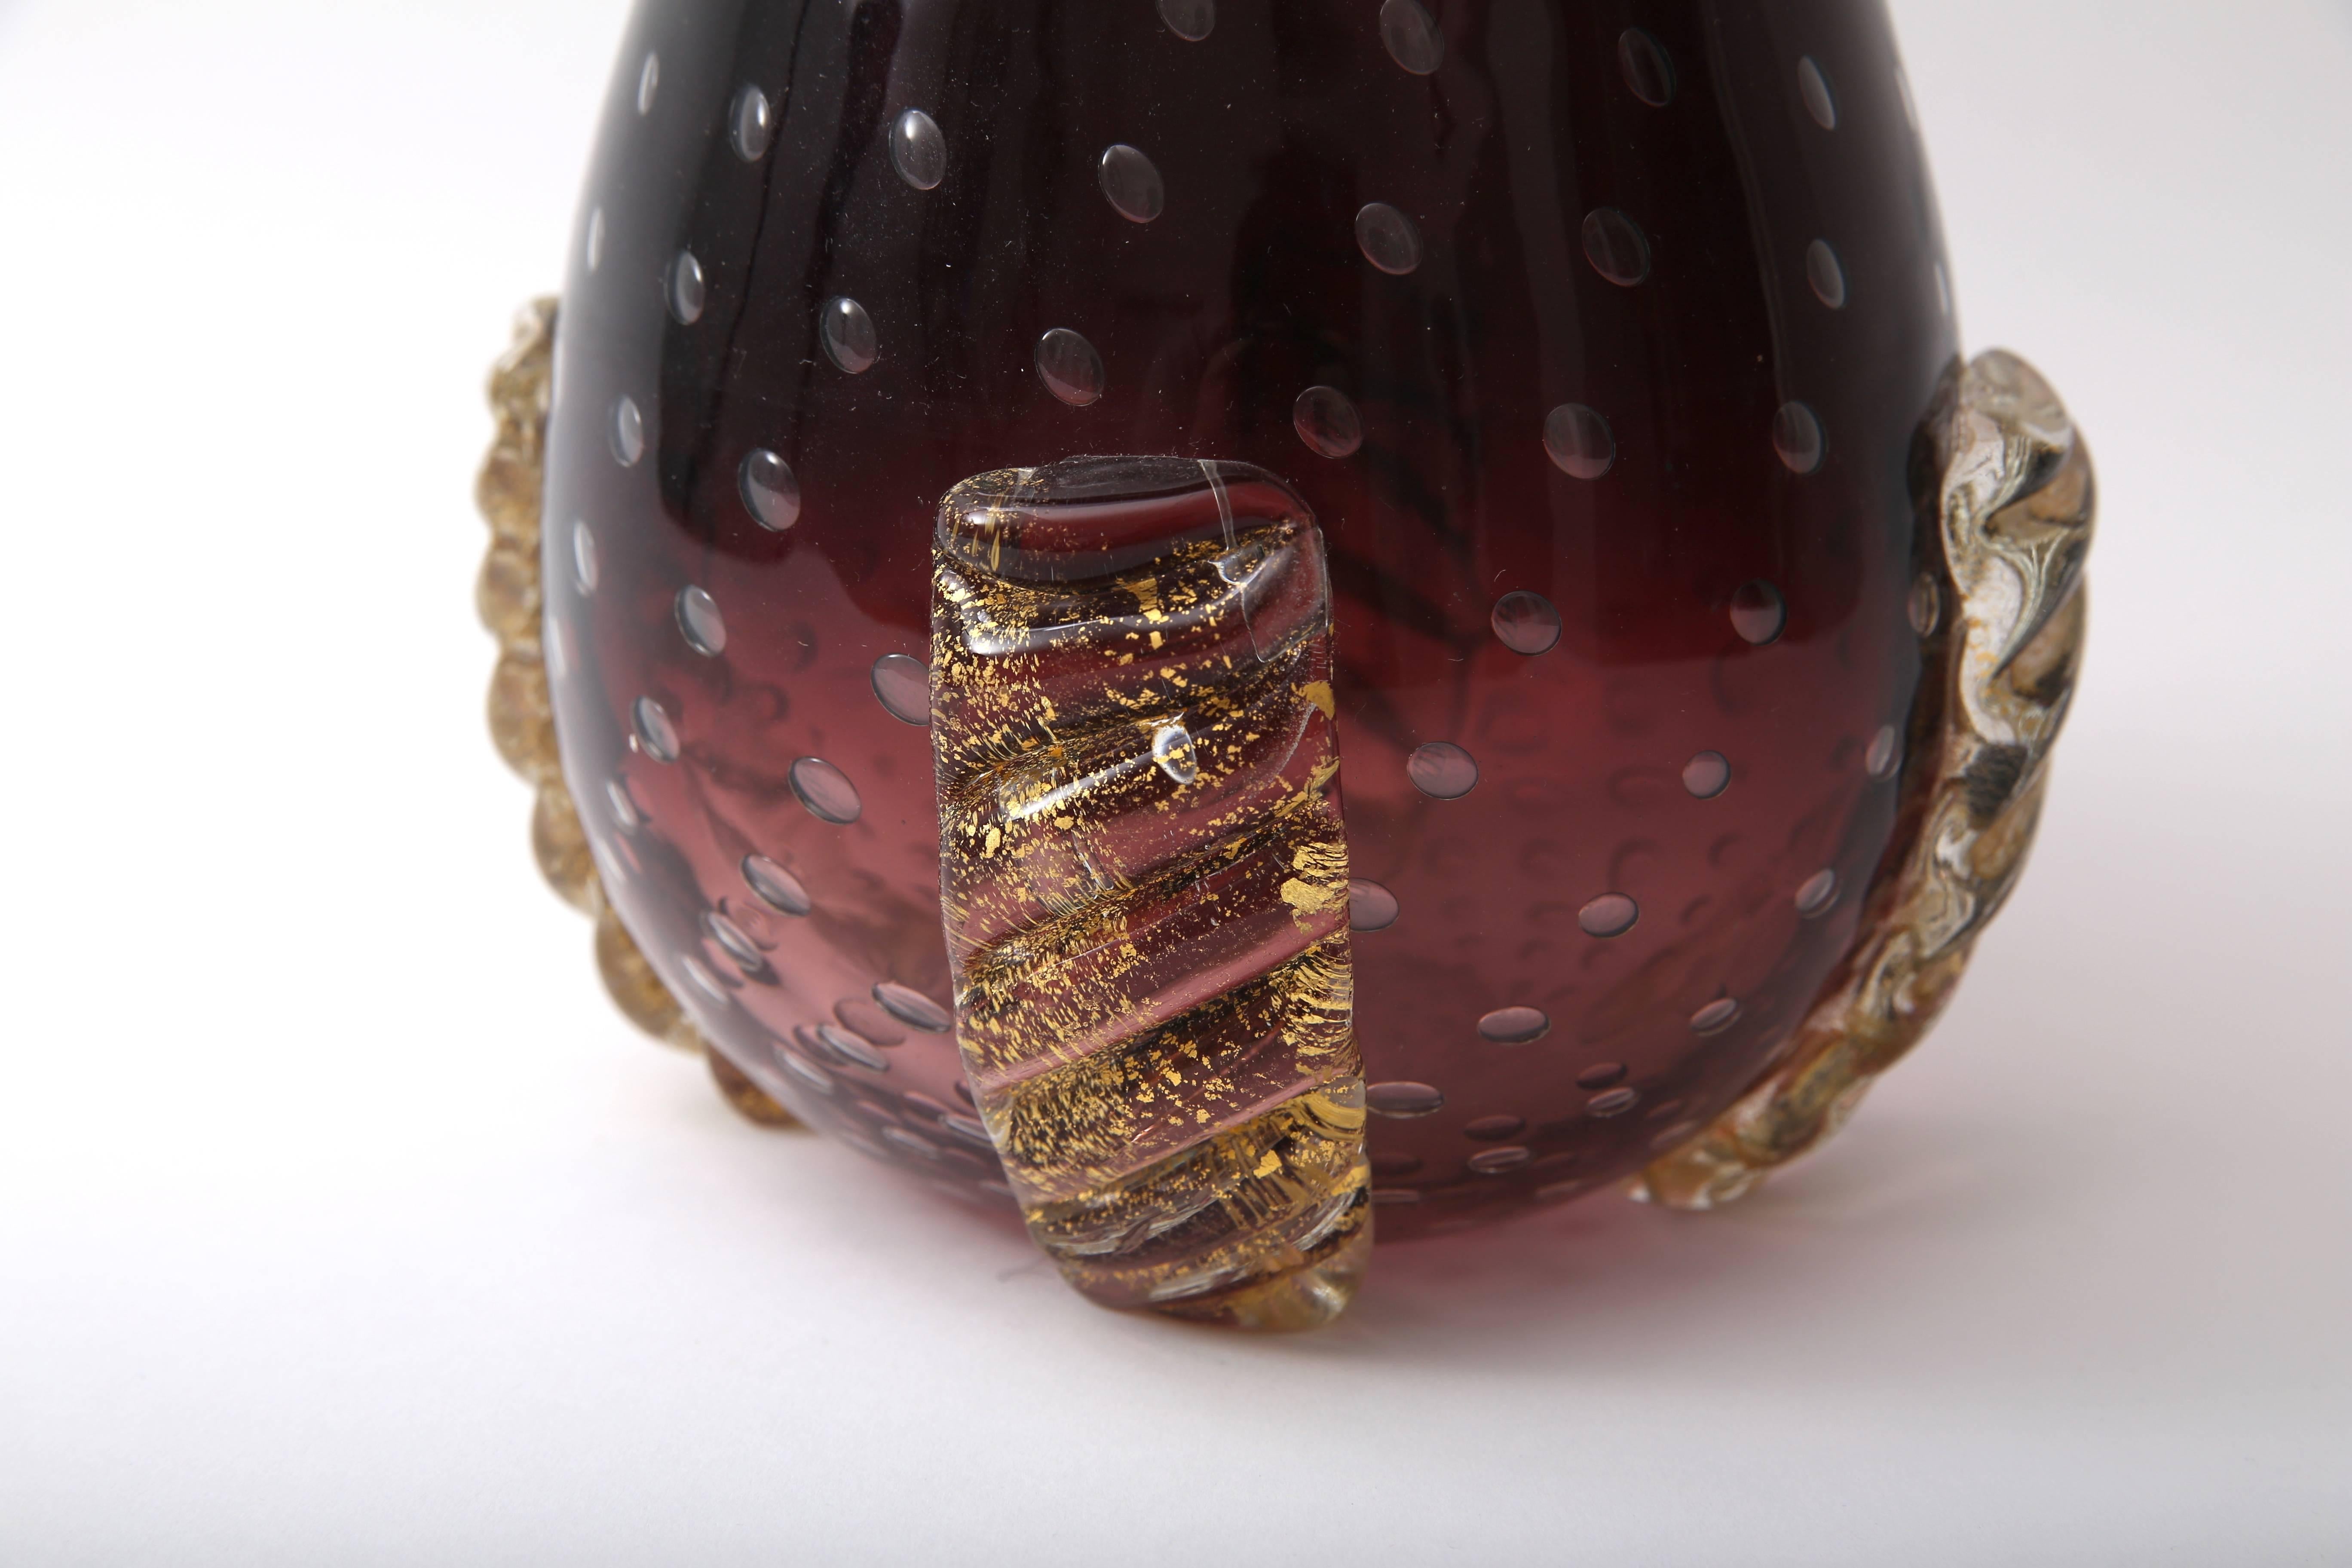 This stylish and rare piece of Murano glass was created by the iconic glass makers Barovier et Toso and will make a perfect addition to your collection or for everyday use with a floral arrangement. The aubergine and gold coloration compliment